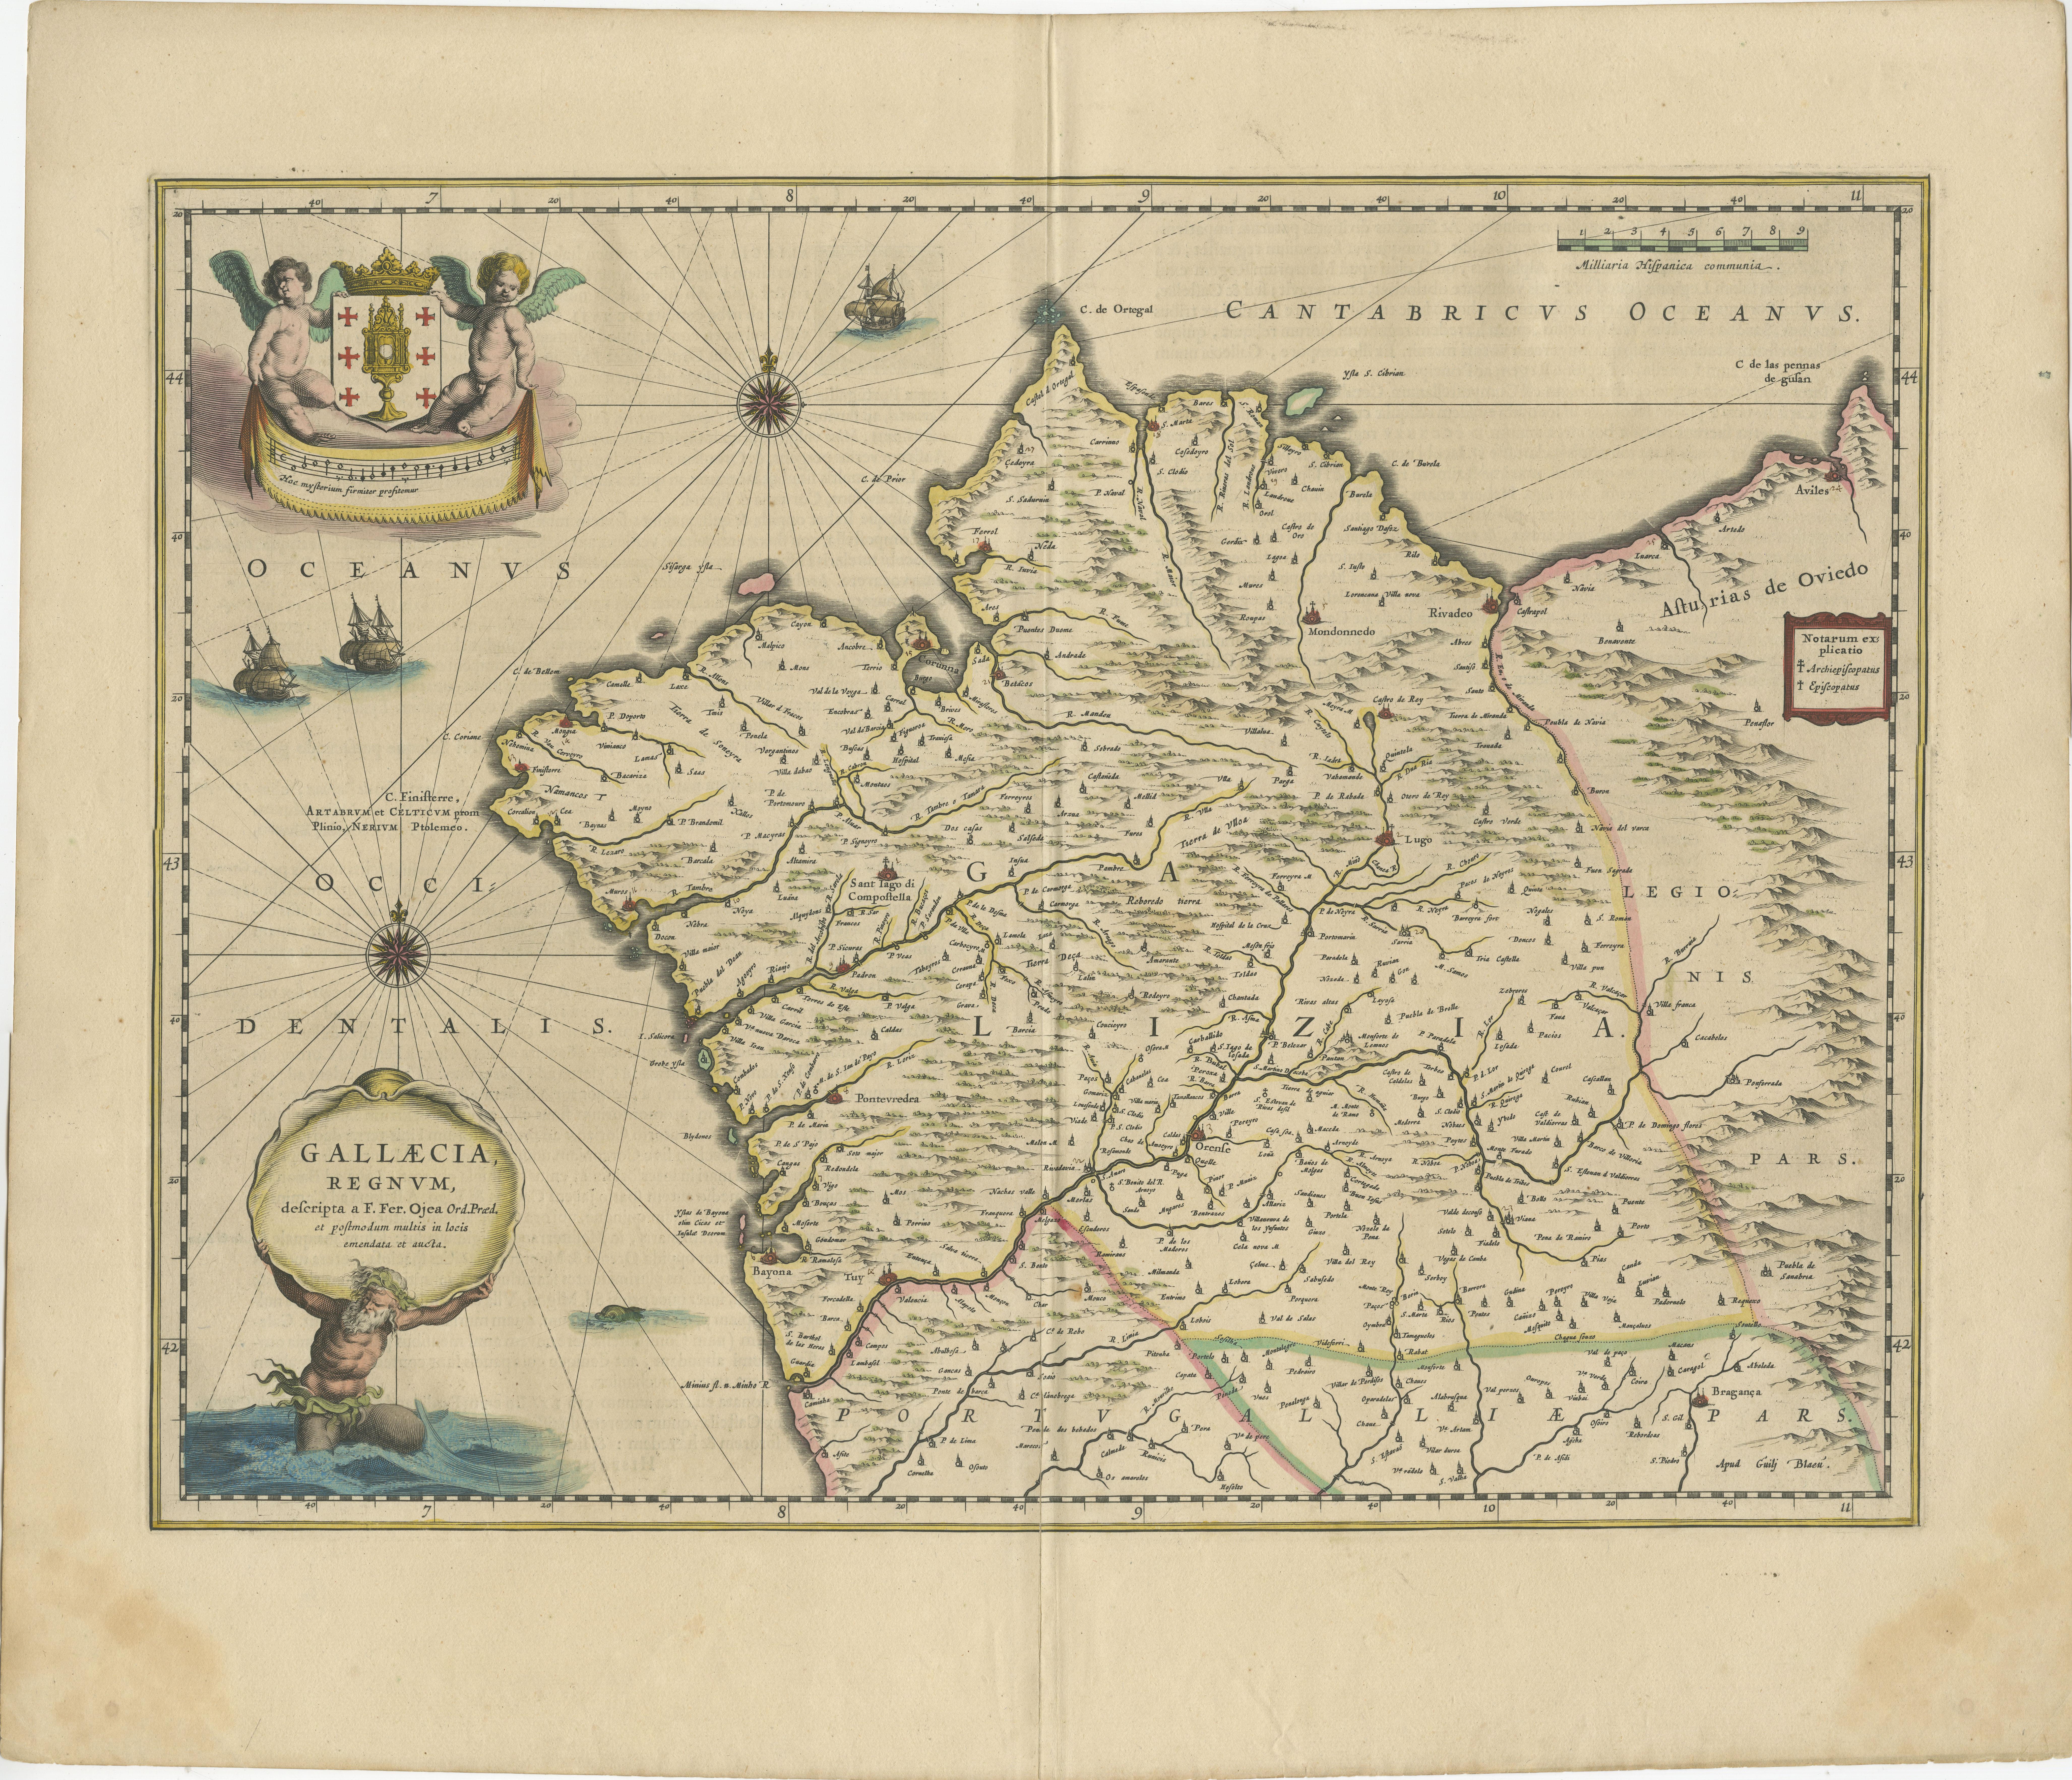 Antique map titled 'Gallaecia Regnum'. Original old map of the northwestern coast of Spain, extending from the Asturias de Oviedo region and Aviles in the Northeast to Bayona and the Portugese border on the South, centered on Santiago di